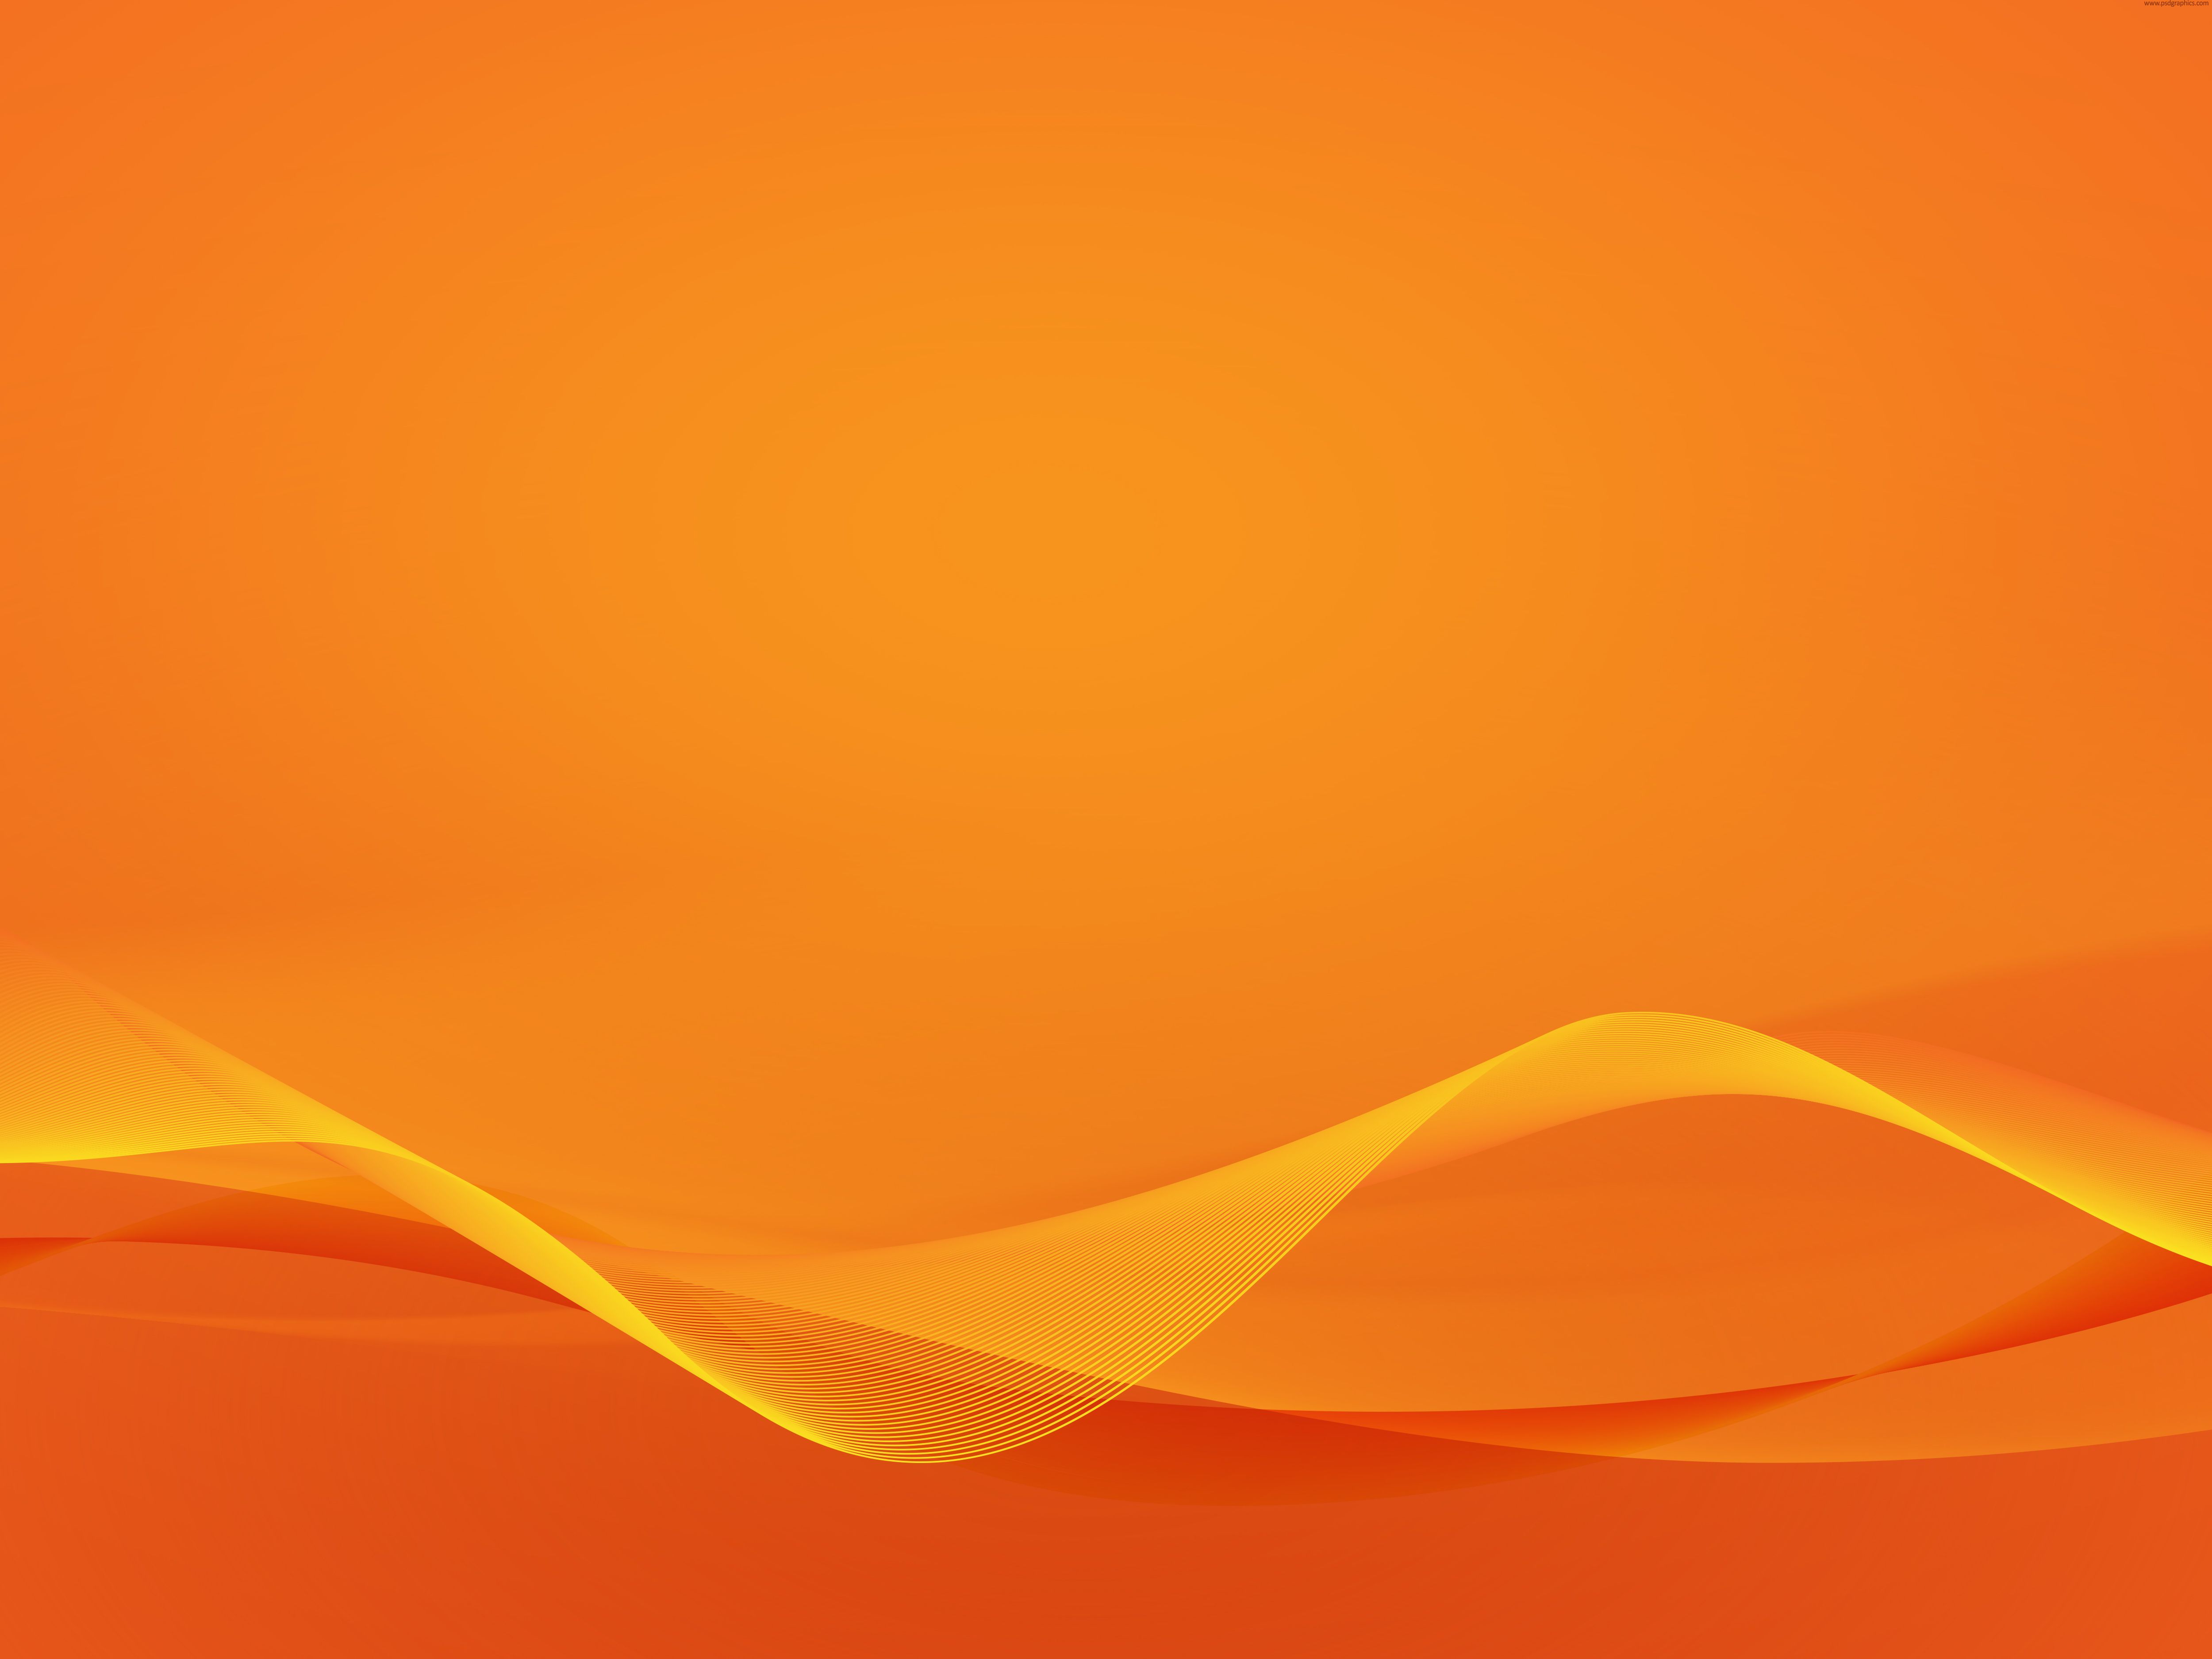 Graphic Design Backgrounds user interface design wavy